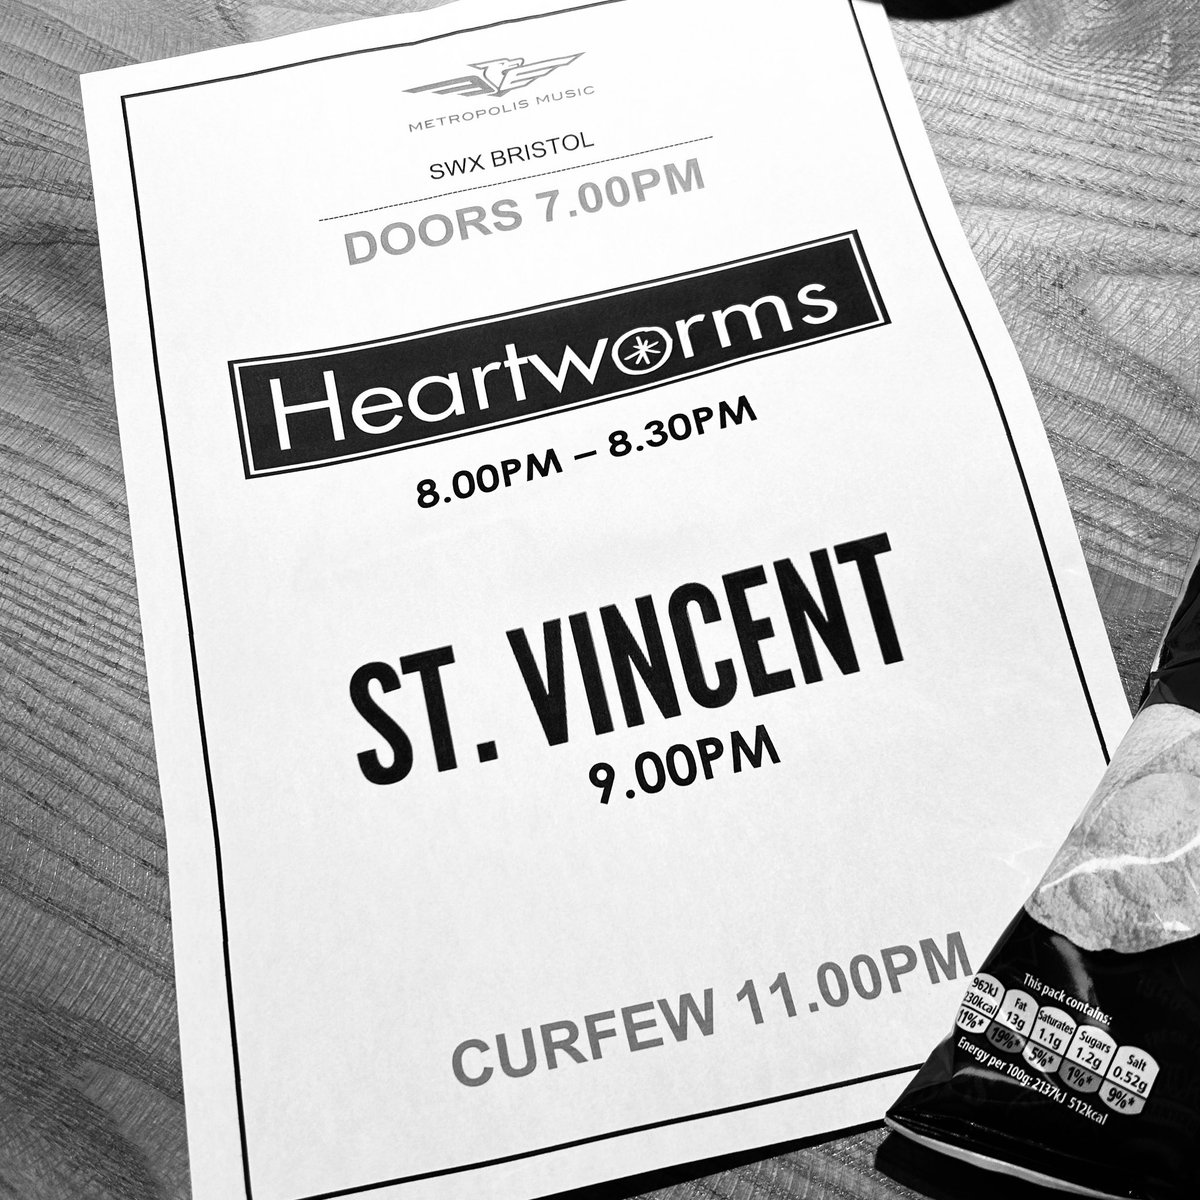 Ooooohhhh mama… What. A. Show.…..
@st_vincent @swxbristol #AllBornScreaming